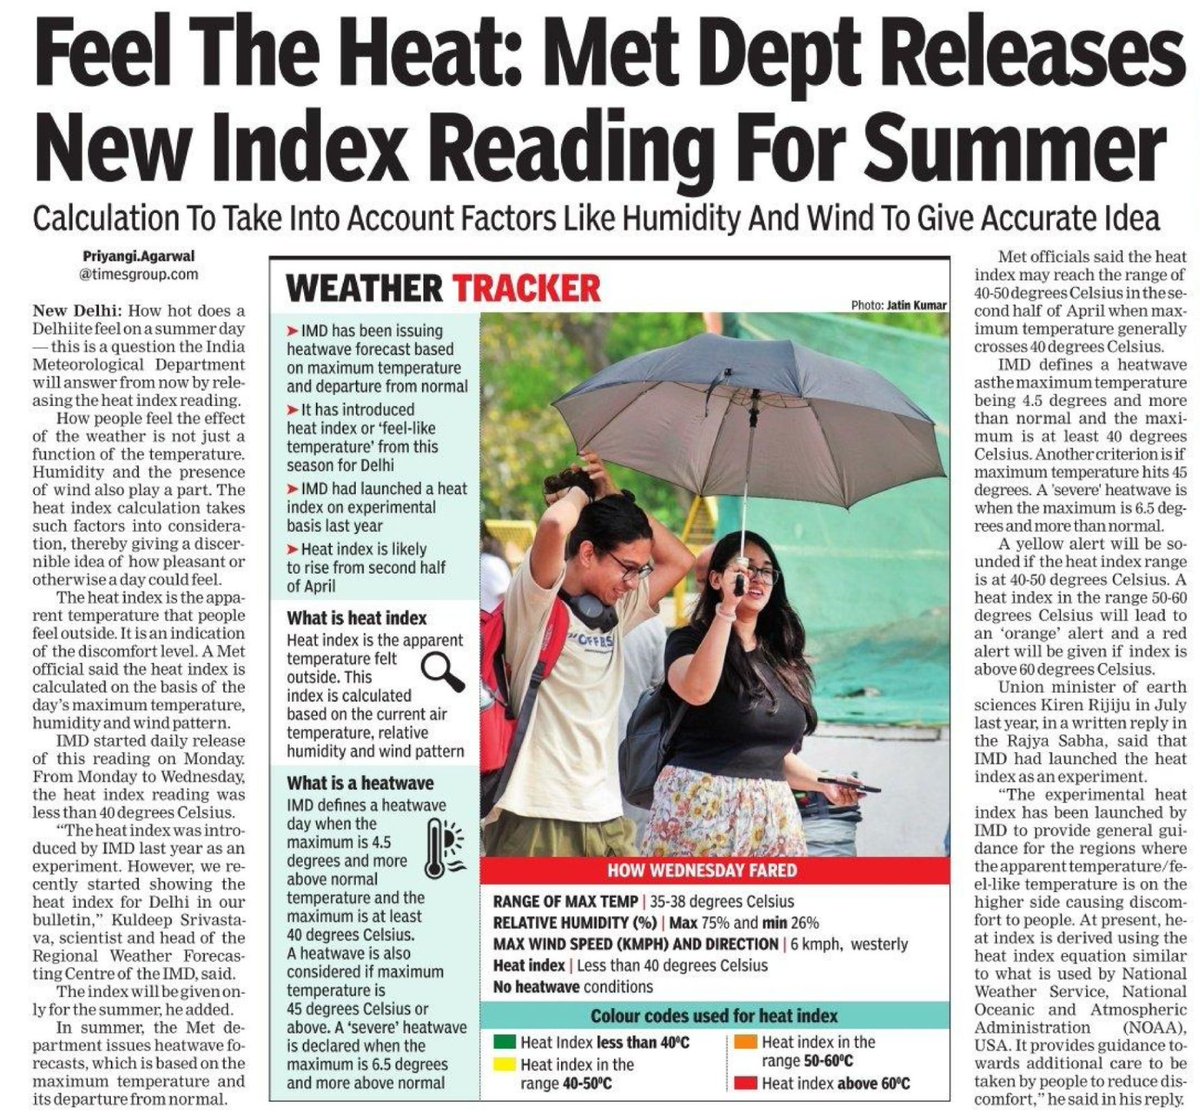 How people feel the effect of the weather is not just a function of the temperature. Humidity and the presence of wind also play a part. The heat index calculation considers such factors. Read more - timesofindia.indiatimes.com/city/delhi/fee… #Heatwave #India